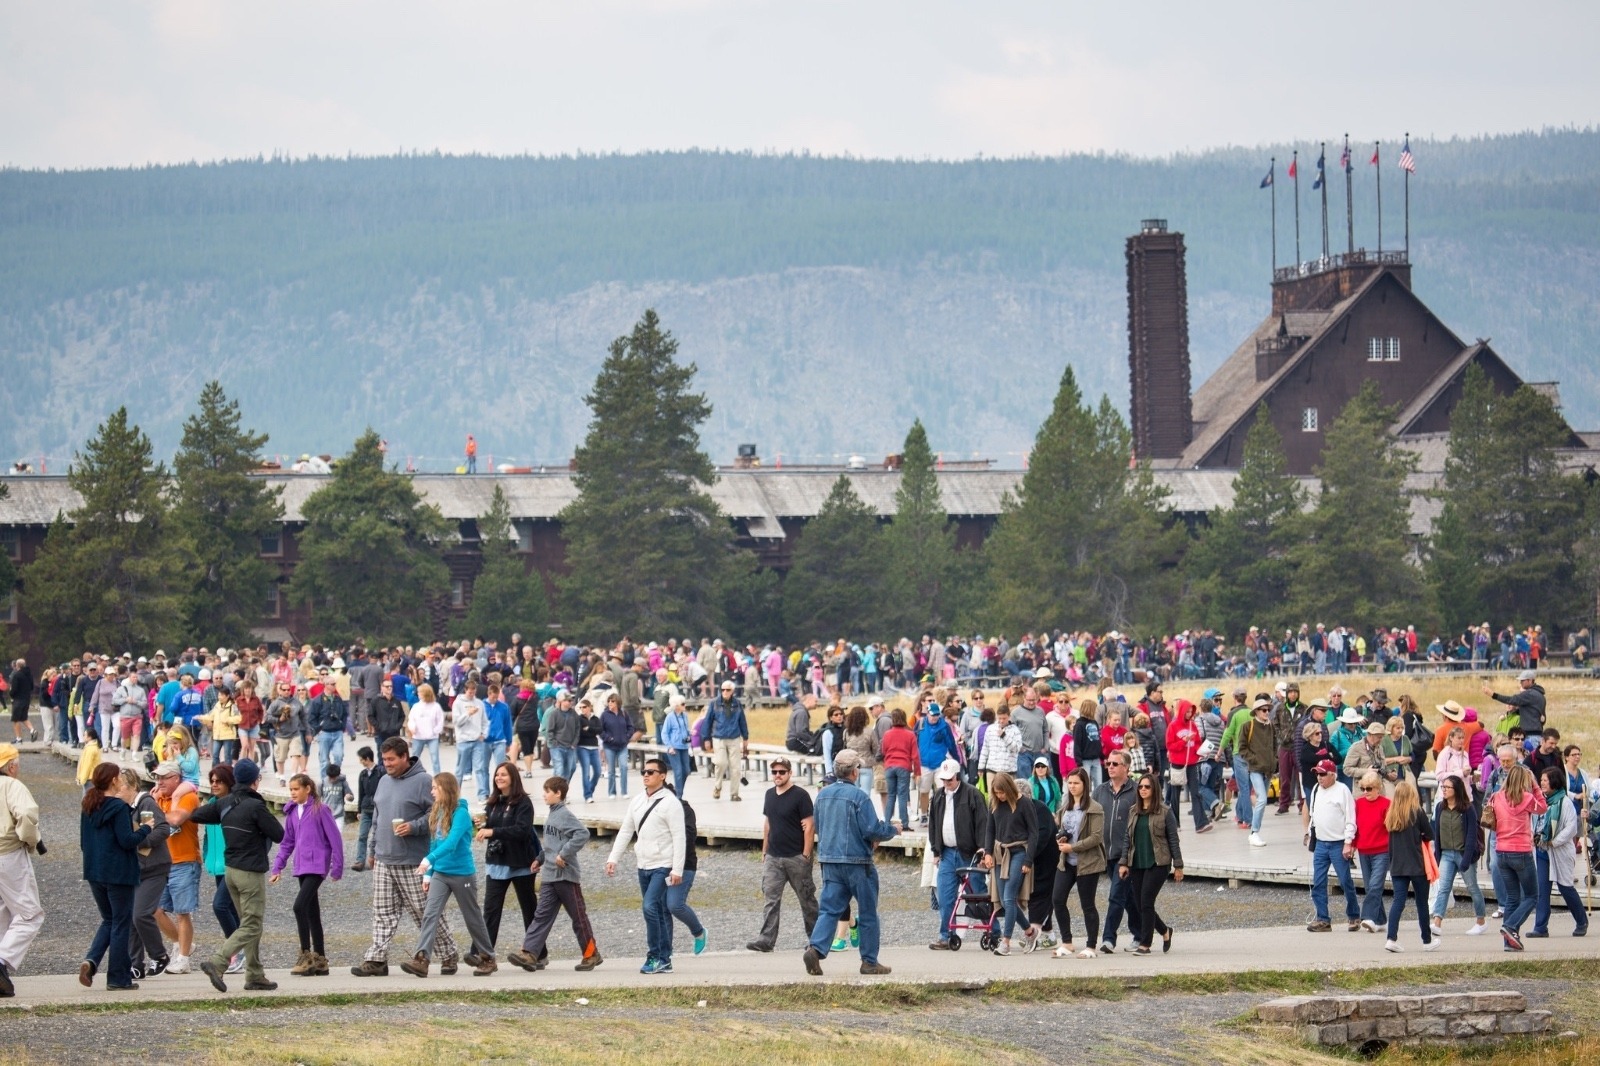 Crowds departing after watching Old Faithful Geyser erupt in Yellowstone. Photo courtesy Neal Herbert/NPS